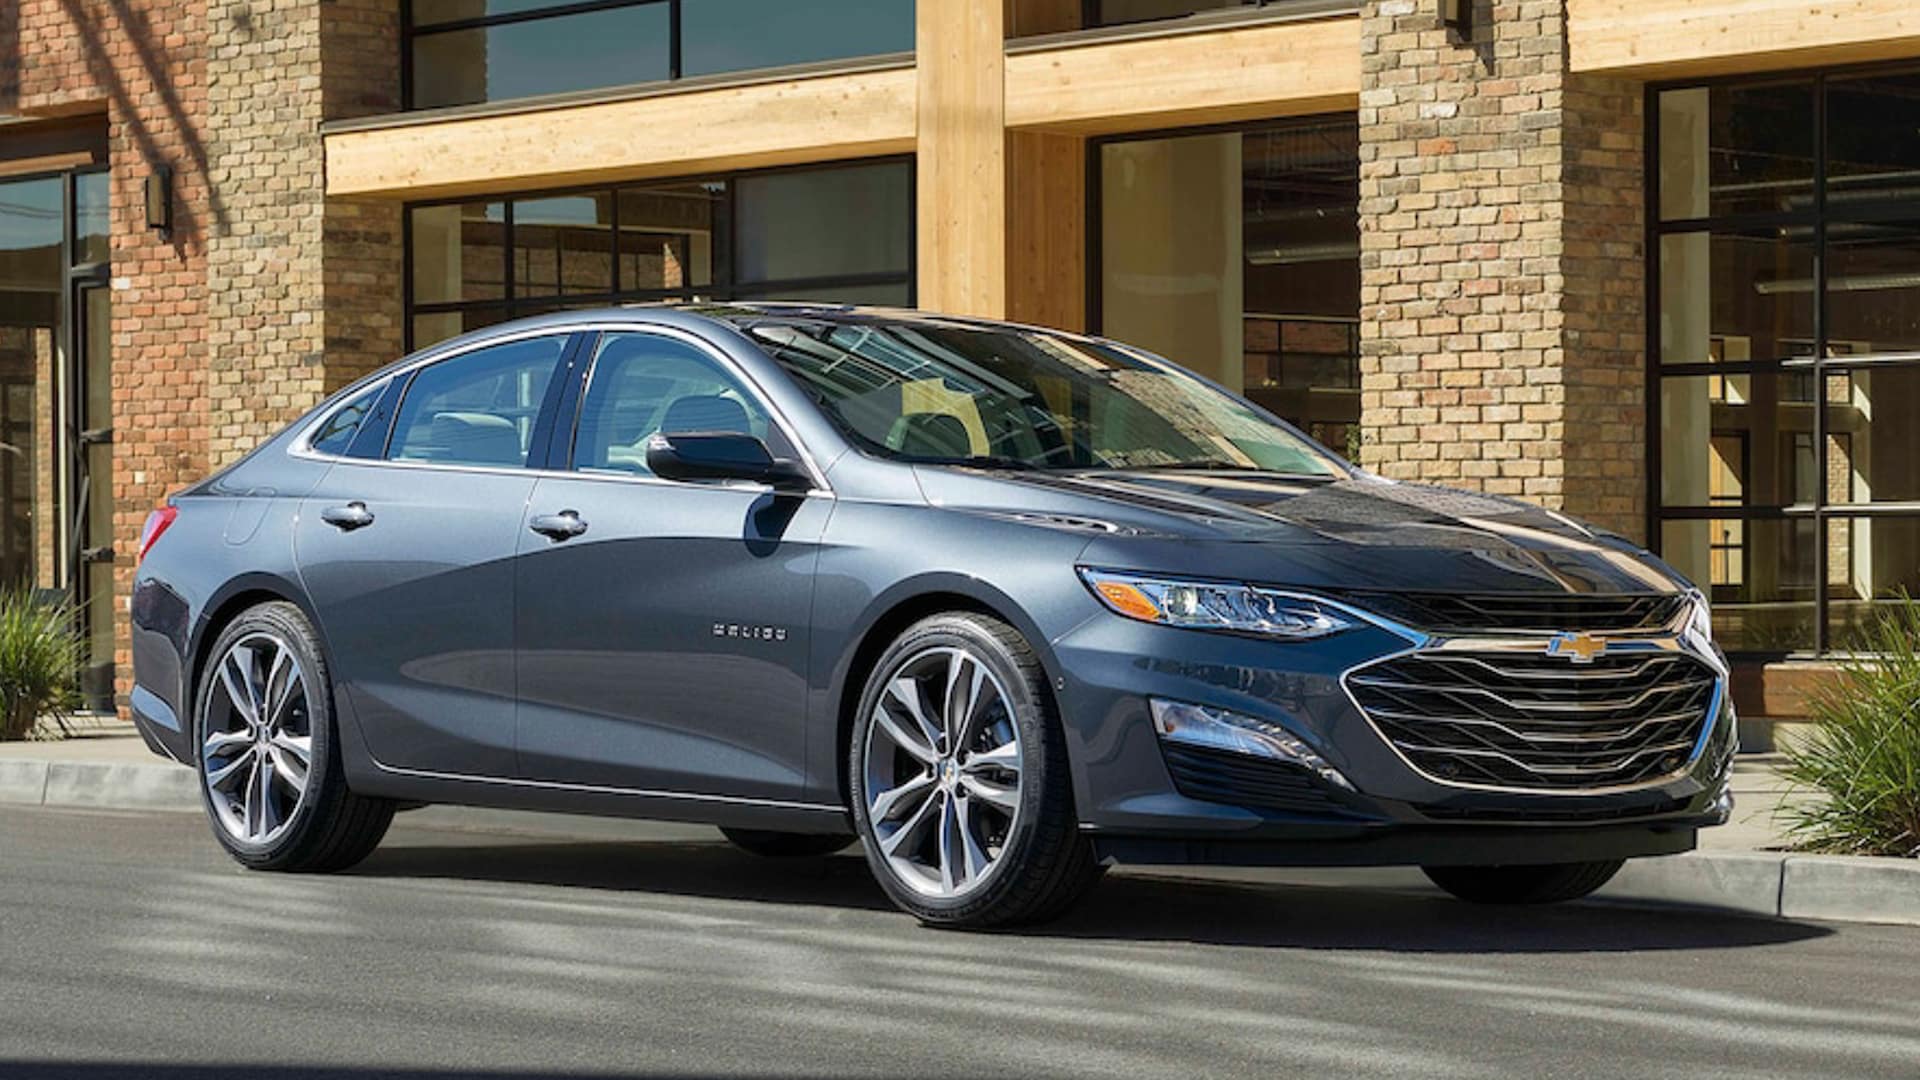 2021 Chevrolet Malibu Prices, Reviews, and Photos - MotorTrend